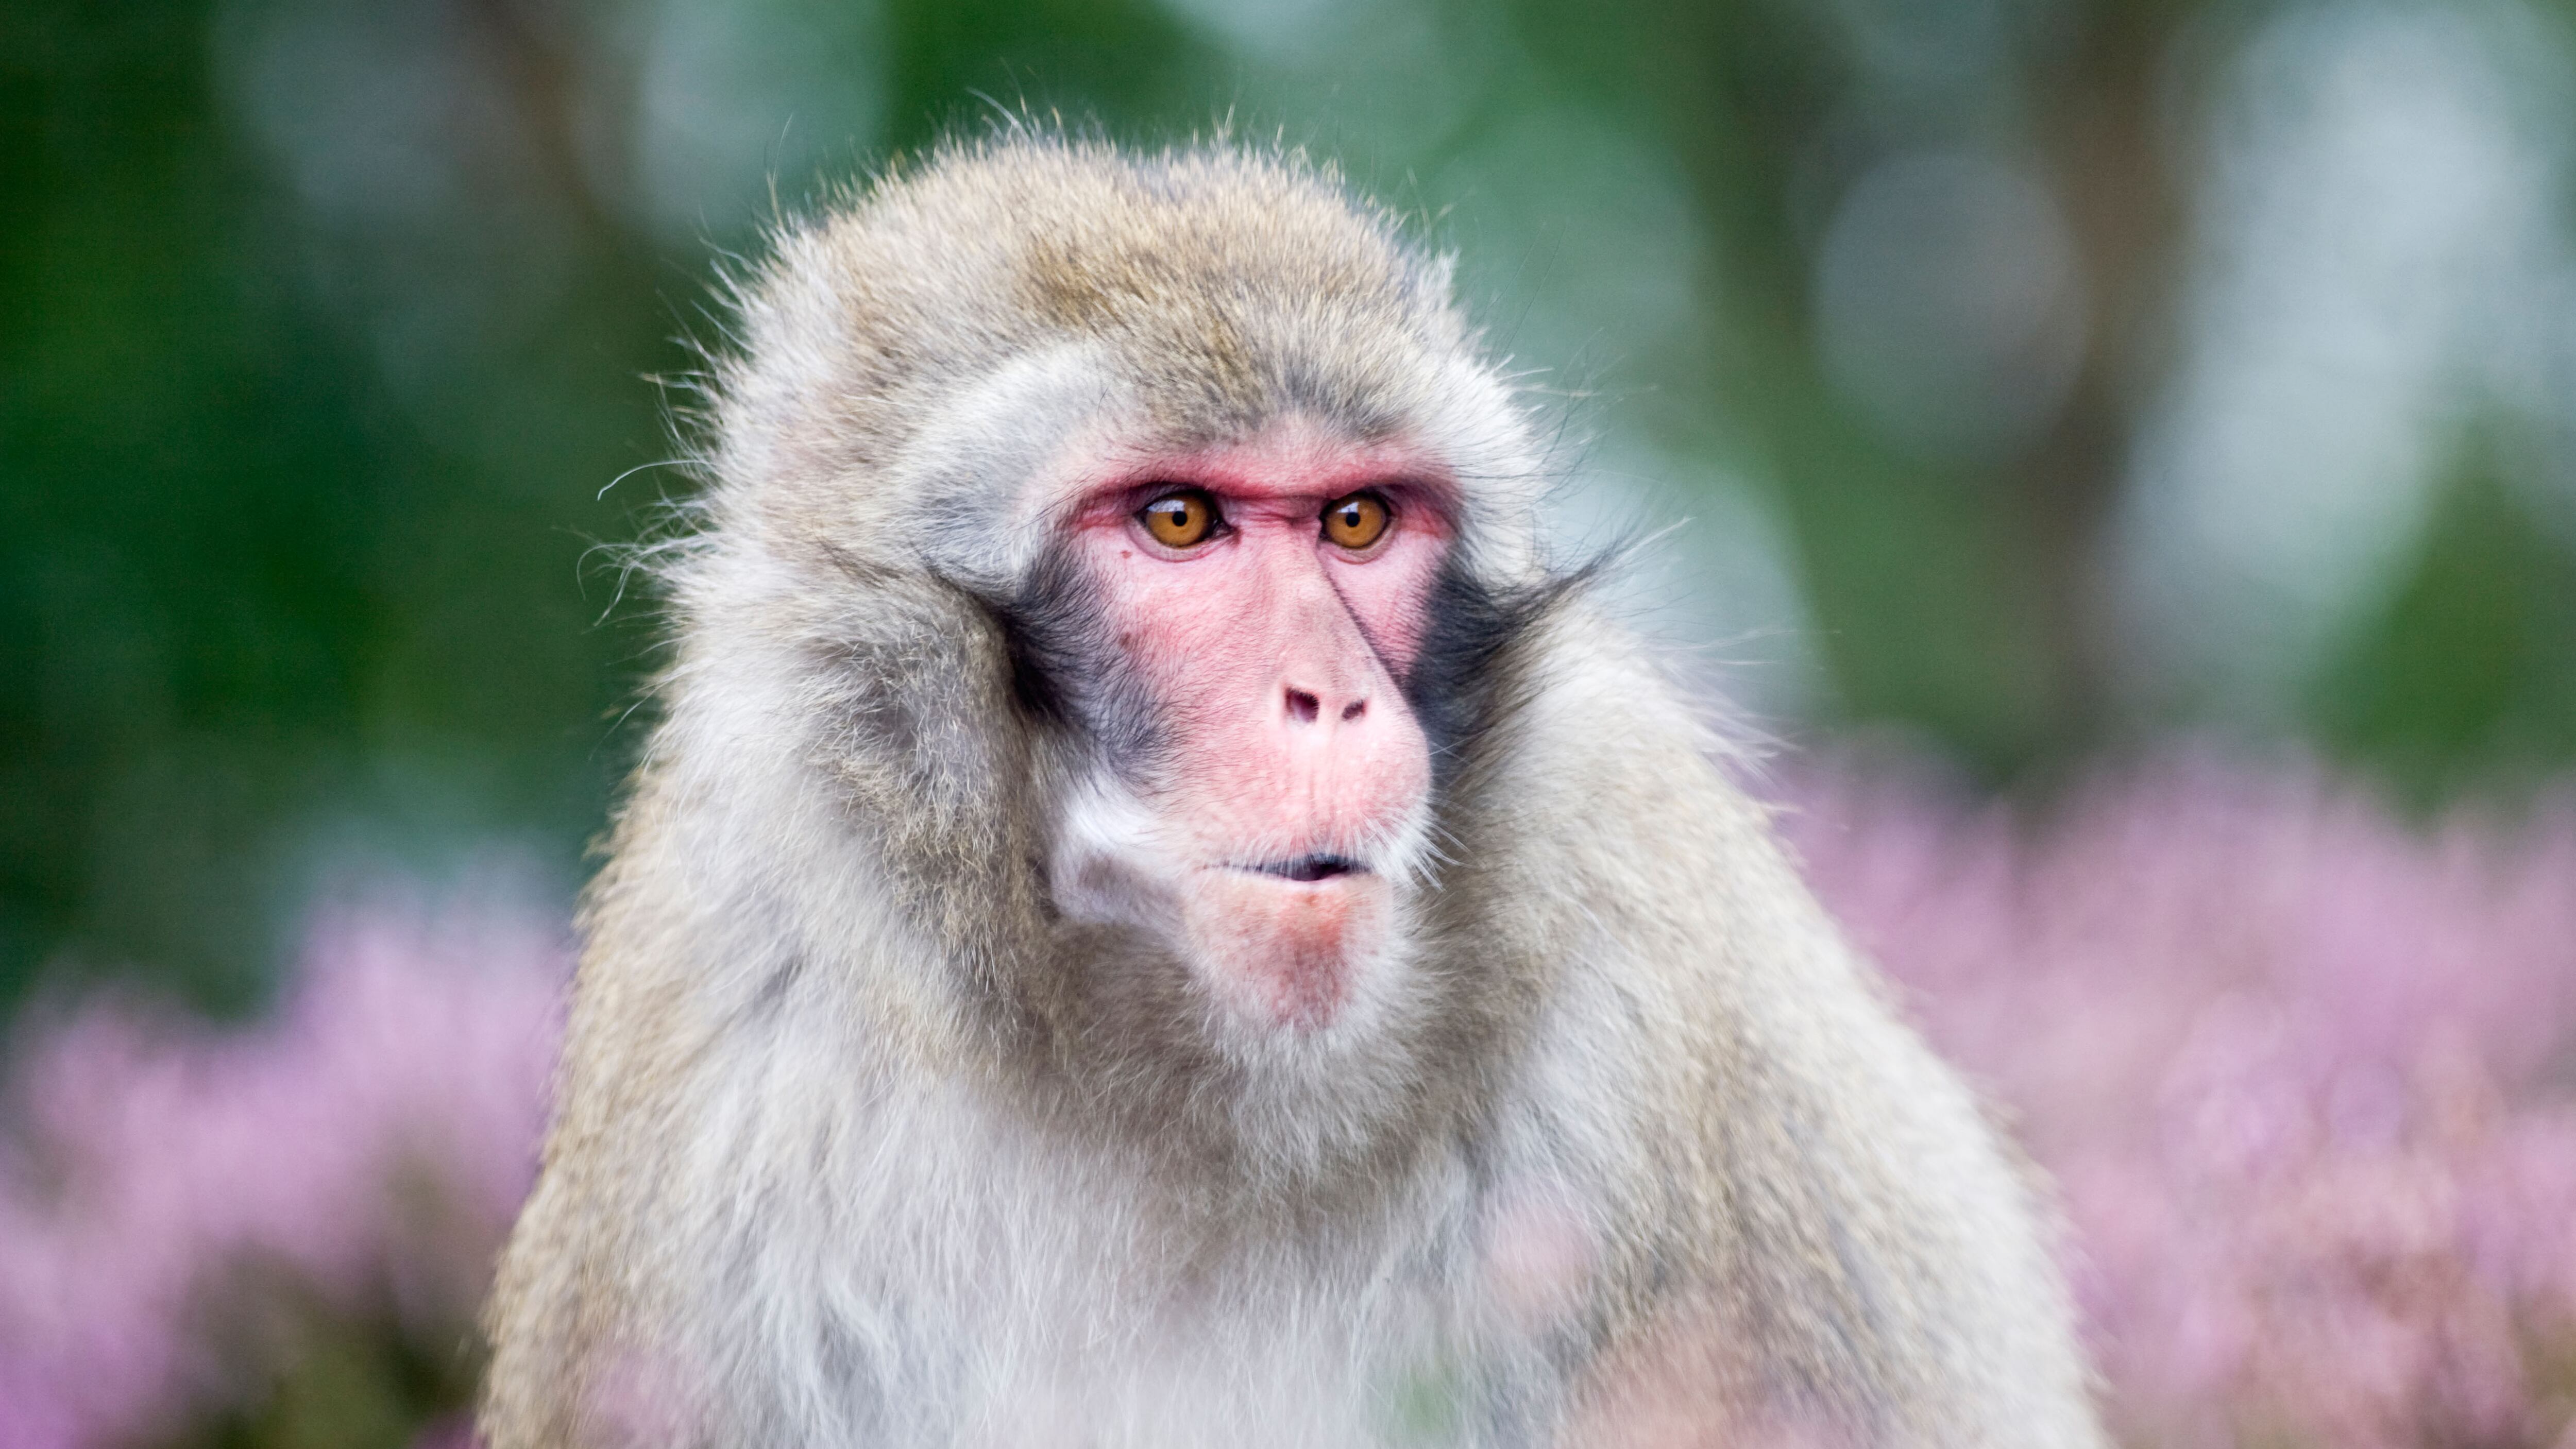 The macaque was spotted in drone footage